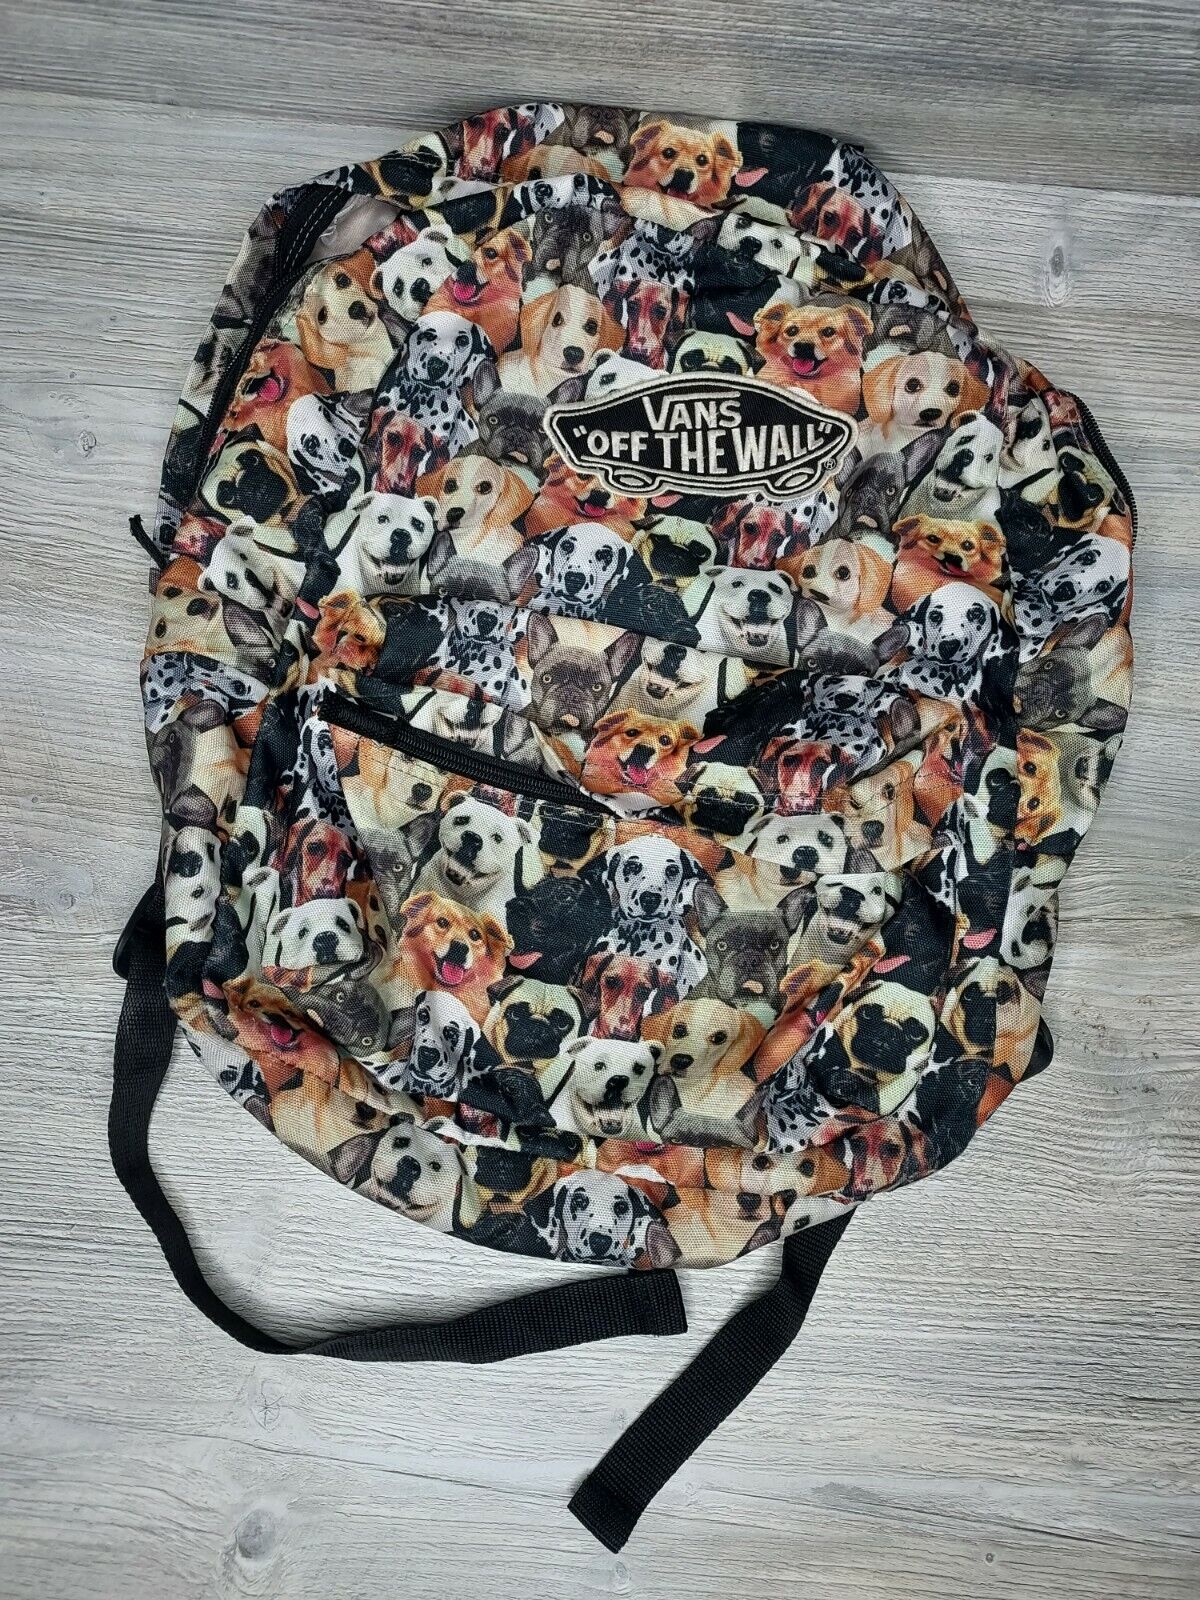 Vans Colorado Springs Mall Off The Wall ASPCA DOGS Edition RARE Backpack 2014 Baltimore Mall Limited